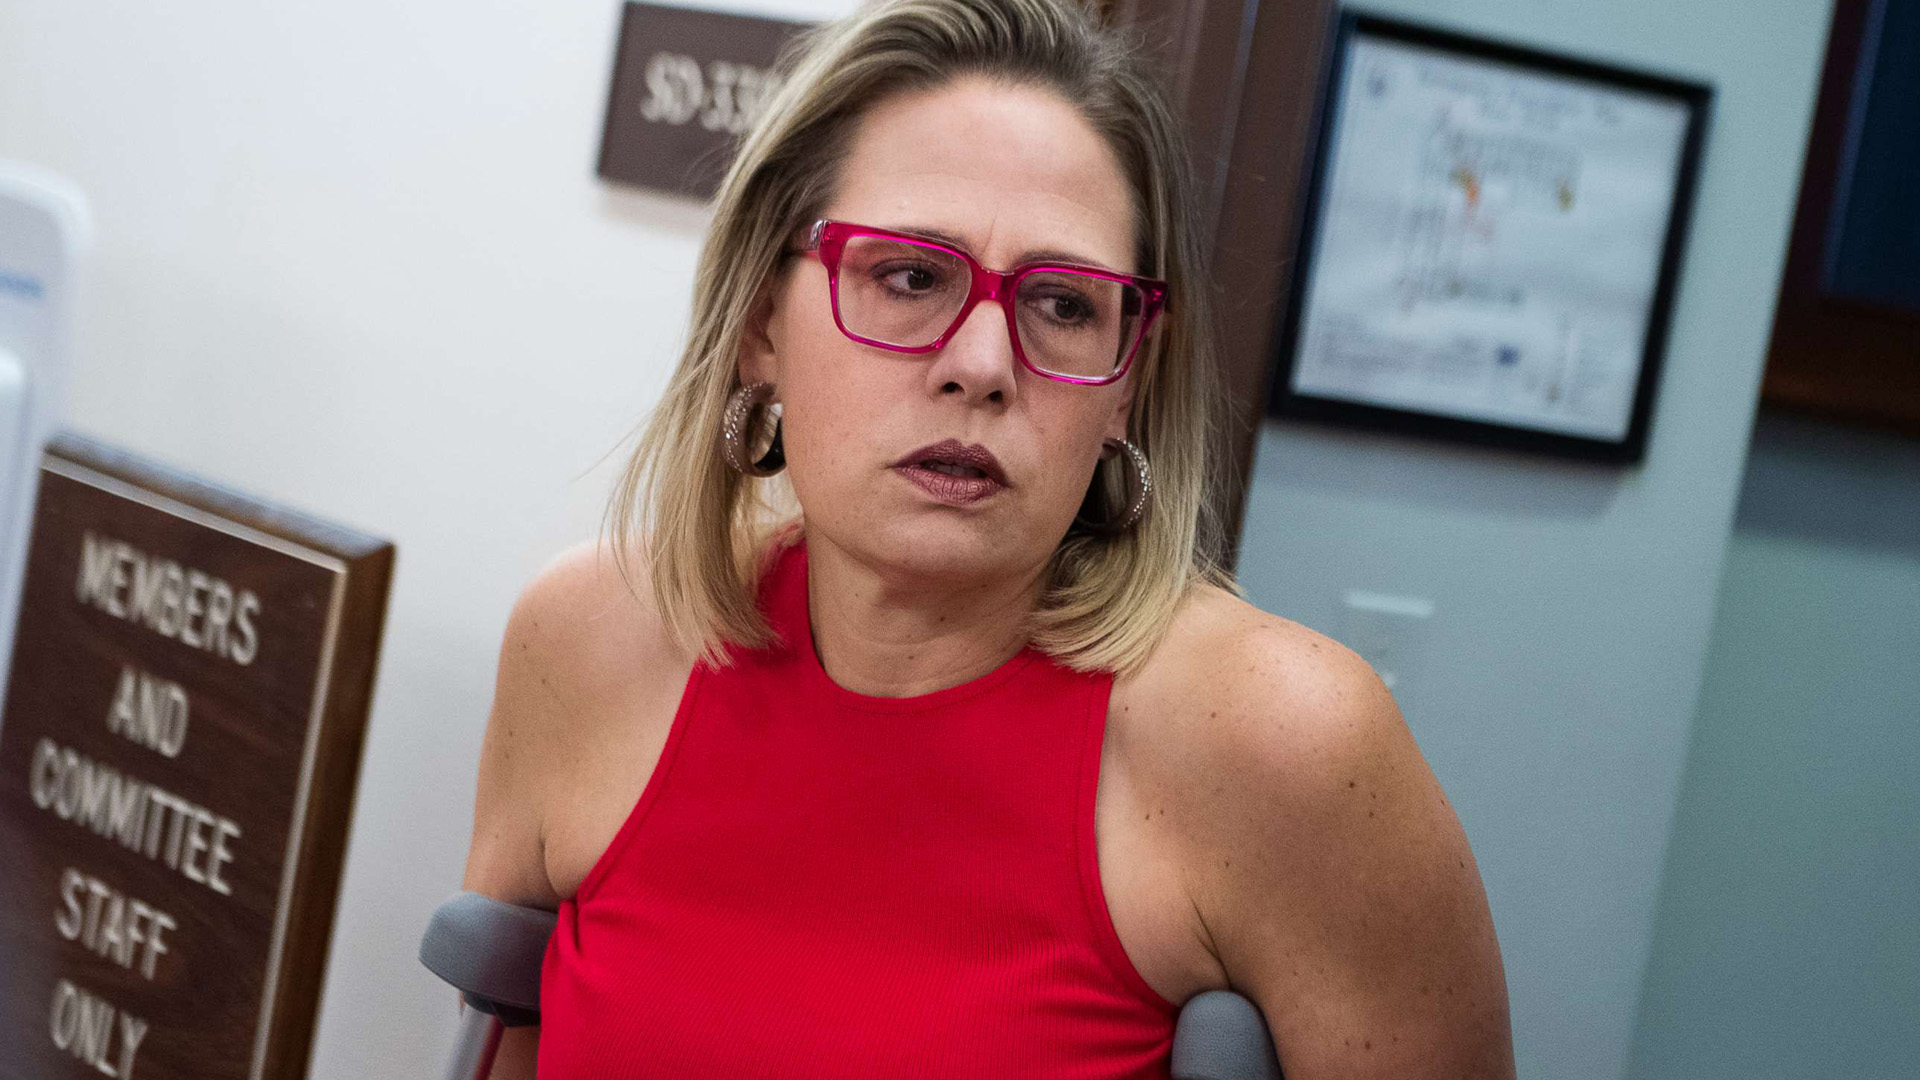 Senator Kyrsten Sinema of Arizona has come under scrutiny for her use of taxpayer money on private air travel. Recent reports reveal that Sinema has spent over $200,000 on private flights since 2020, with $116,000 in 2023 alone. As constituents and watchdog groups question her expenses, the senator's travel choices have sparked a debate about responsible budget management and accessibility to the public.